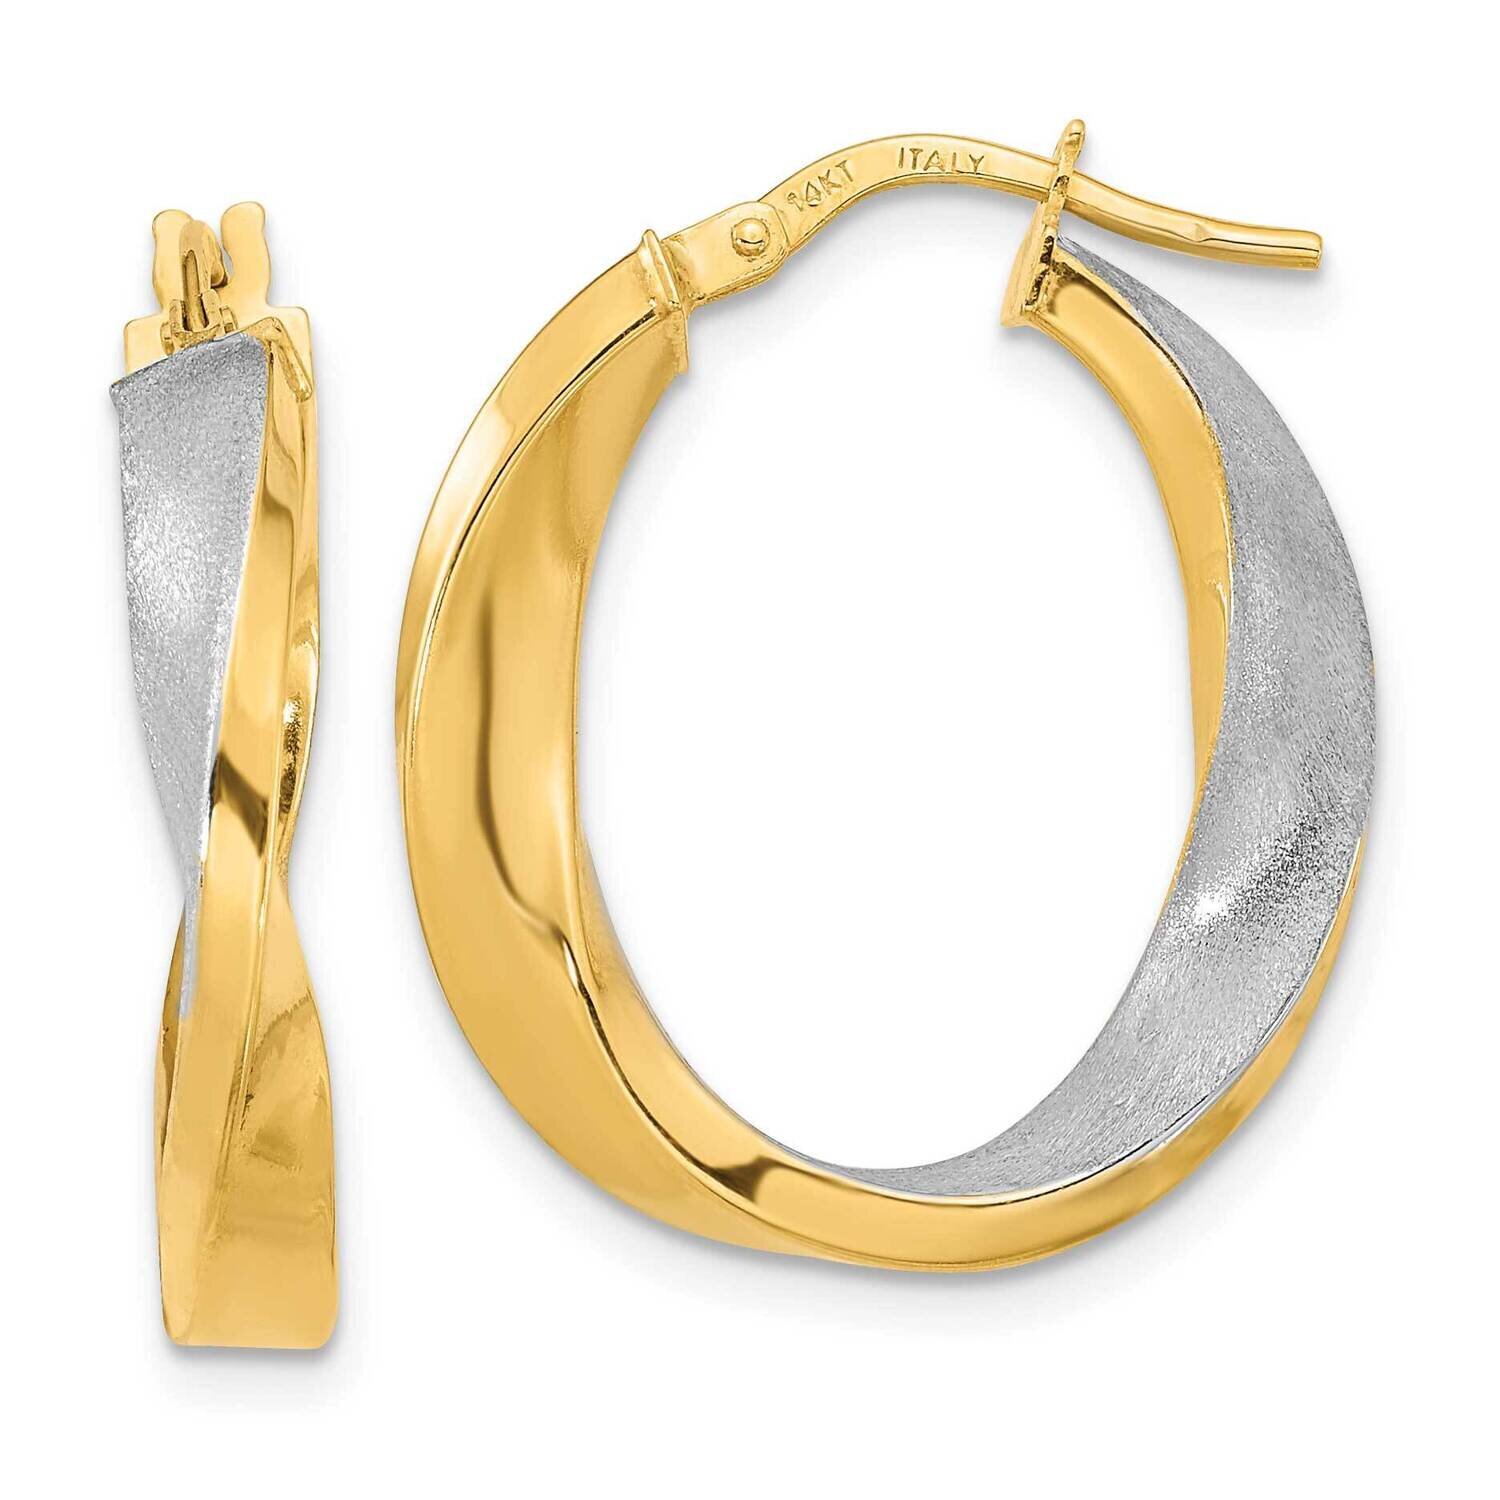 Polished and Satin Oval Twist Hoop Earrings 14k Gold with White Rhodium TF2126